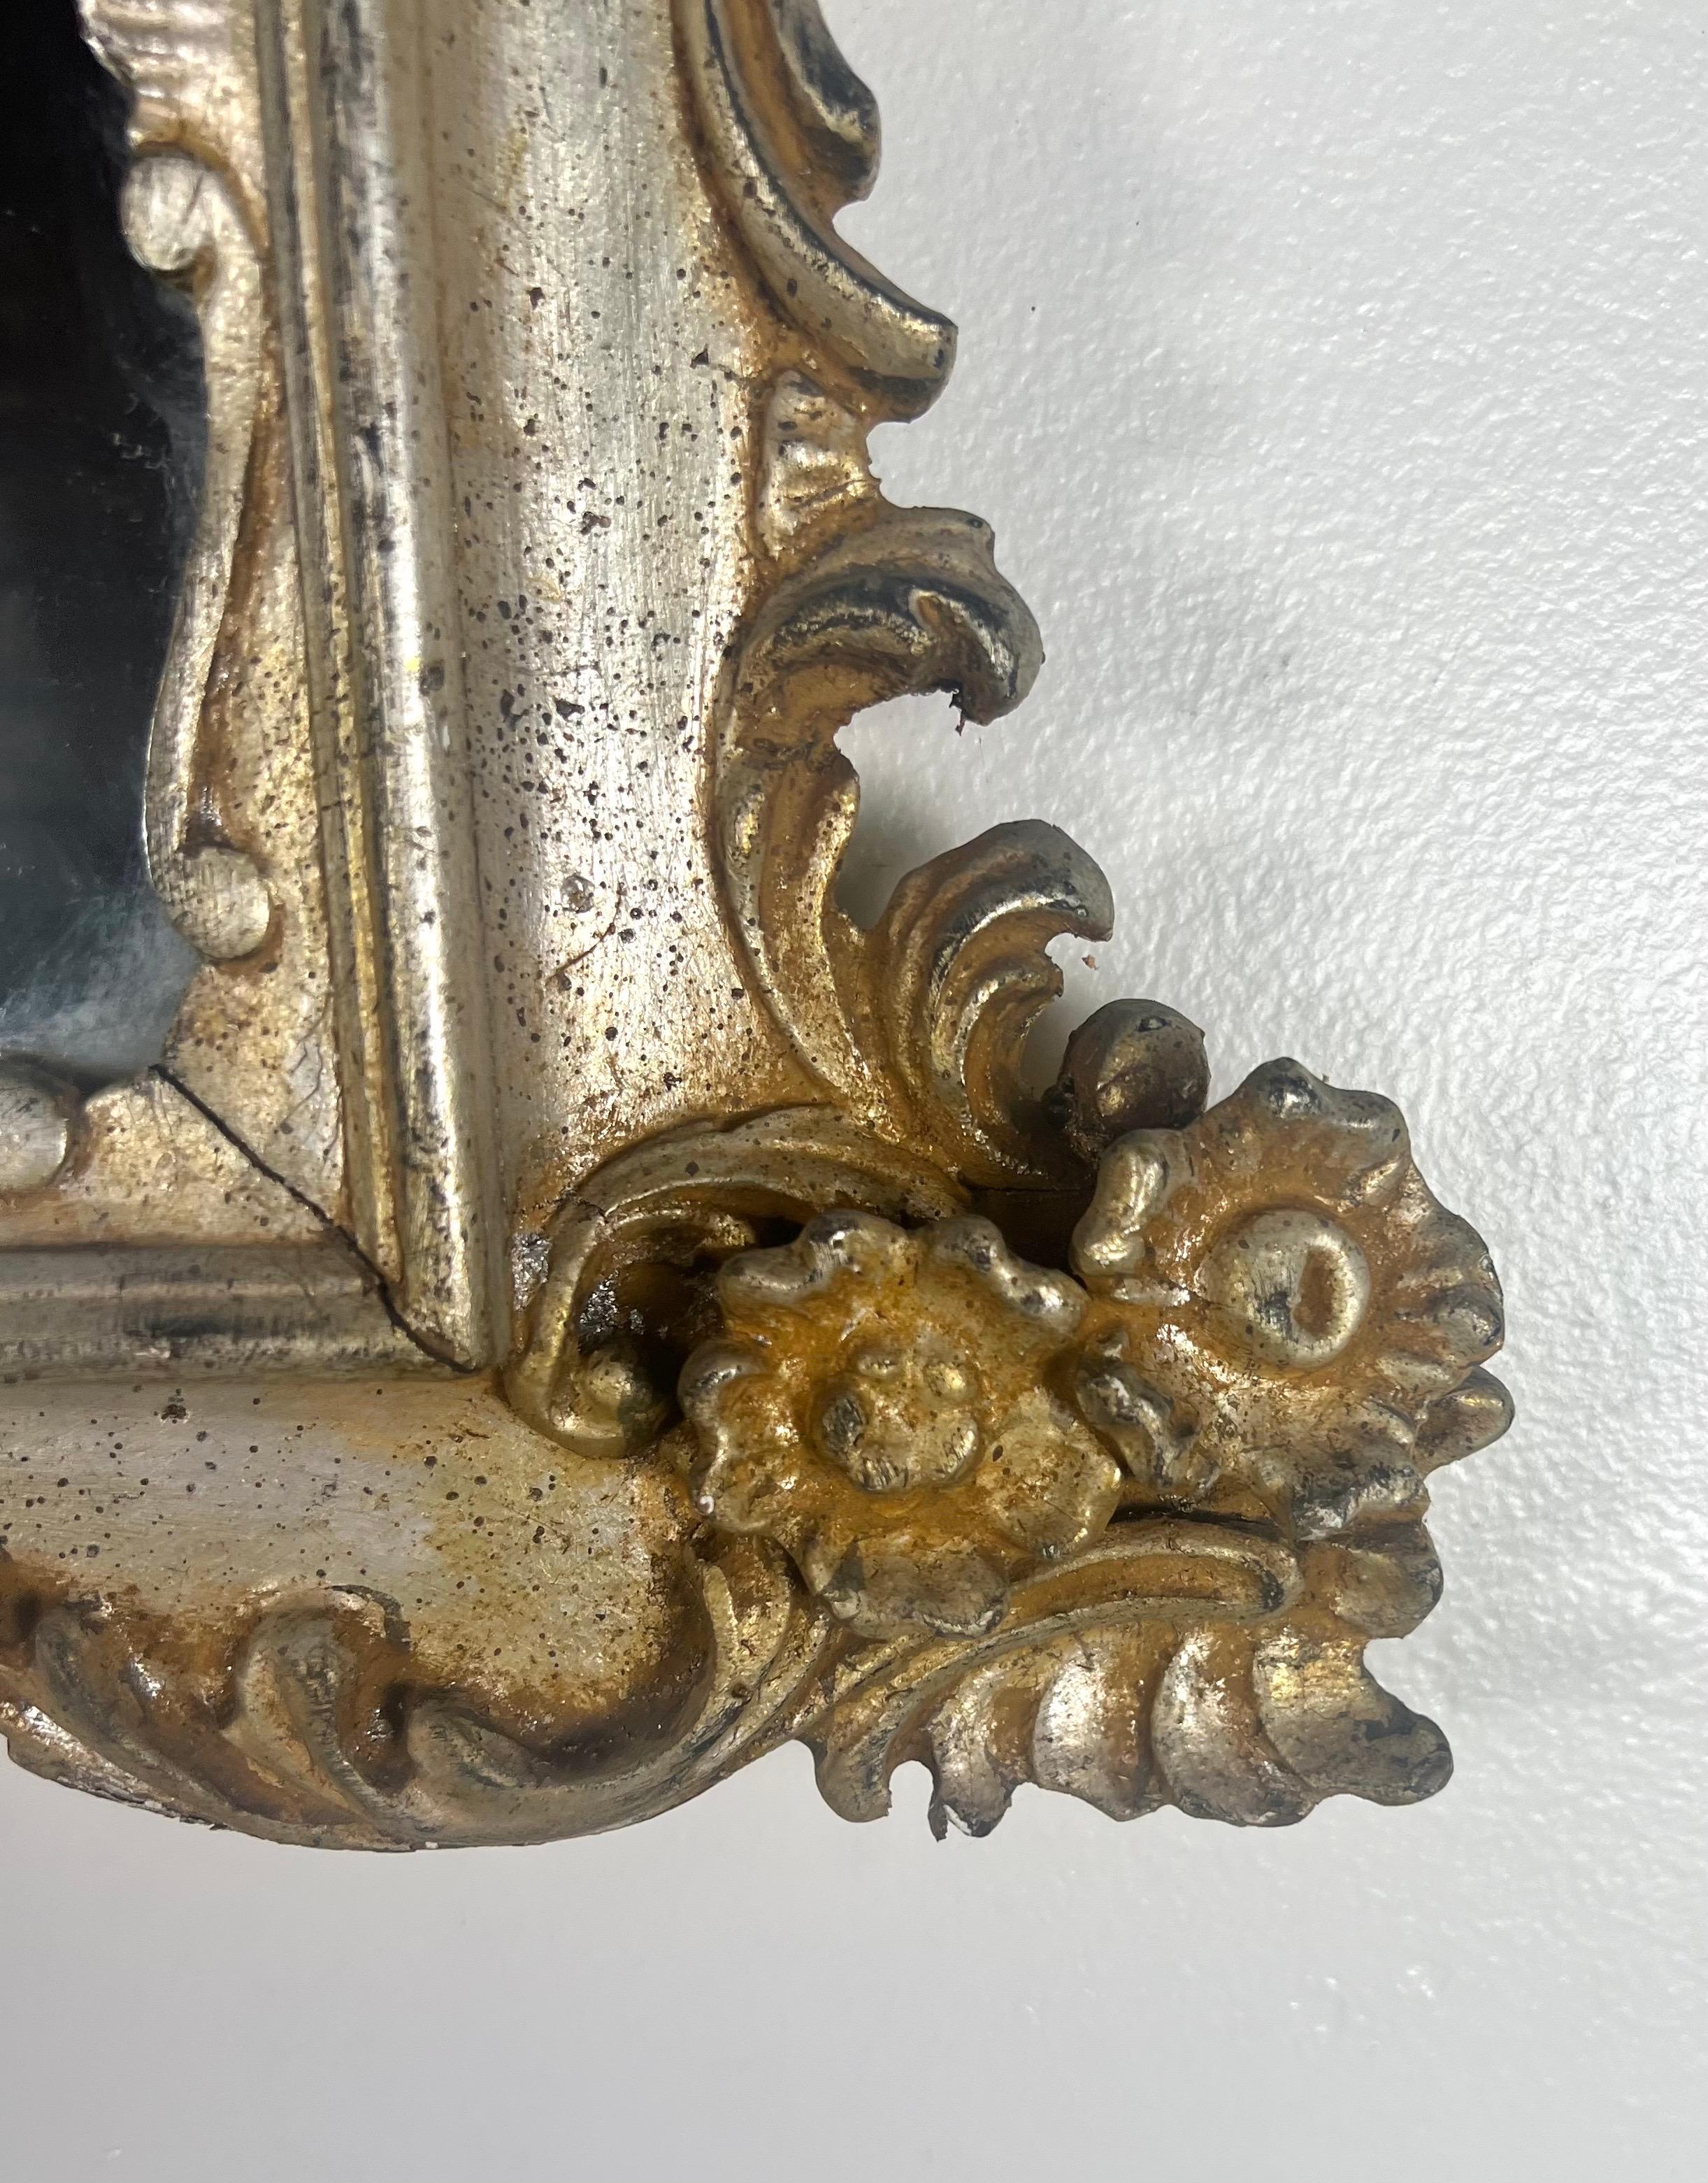 The silvered gilt wood mirror with gold highlights on the carvings is inspired by Rococo styles.  Its elaborate gilt wood frame features an array of intricate carvings, including acanthus leaves, florals, and scrolled elements, which are typical of